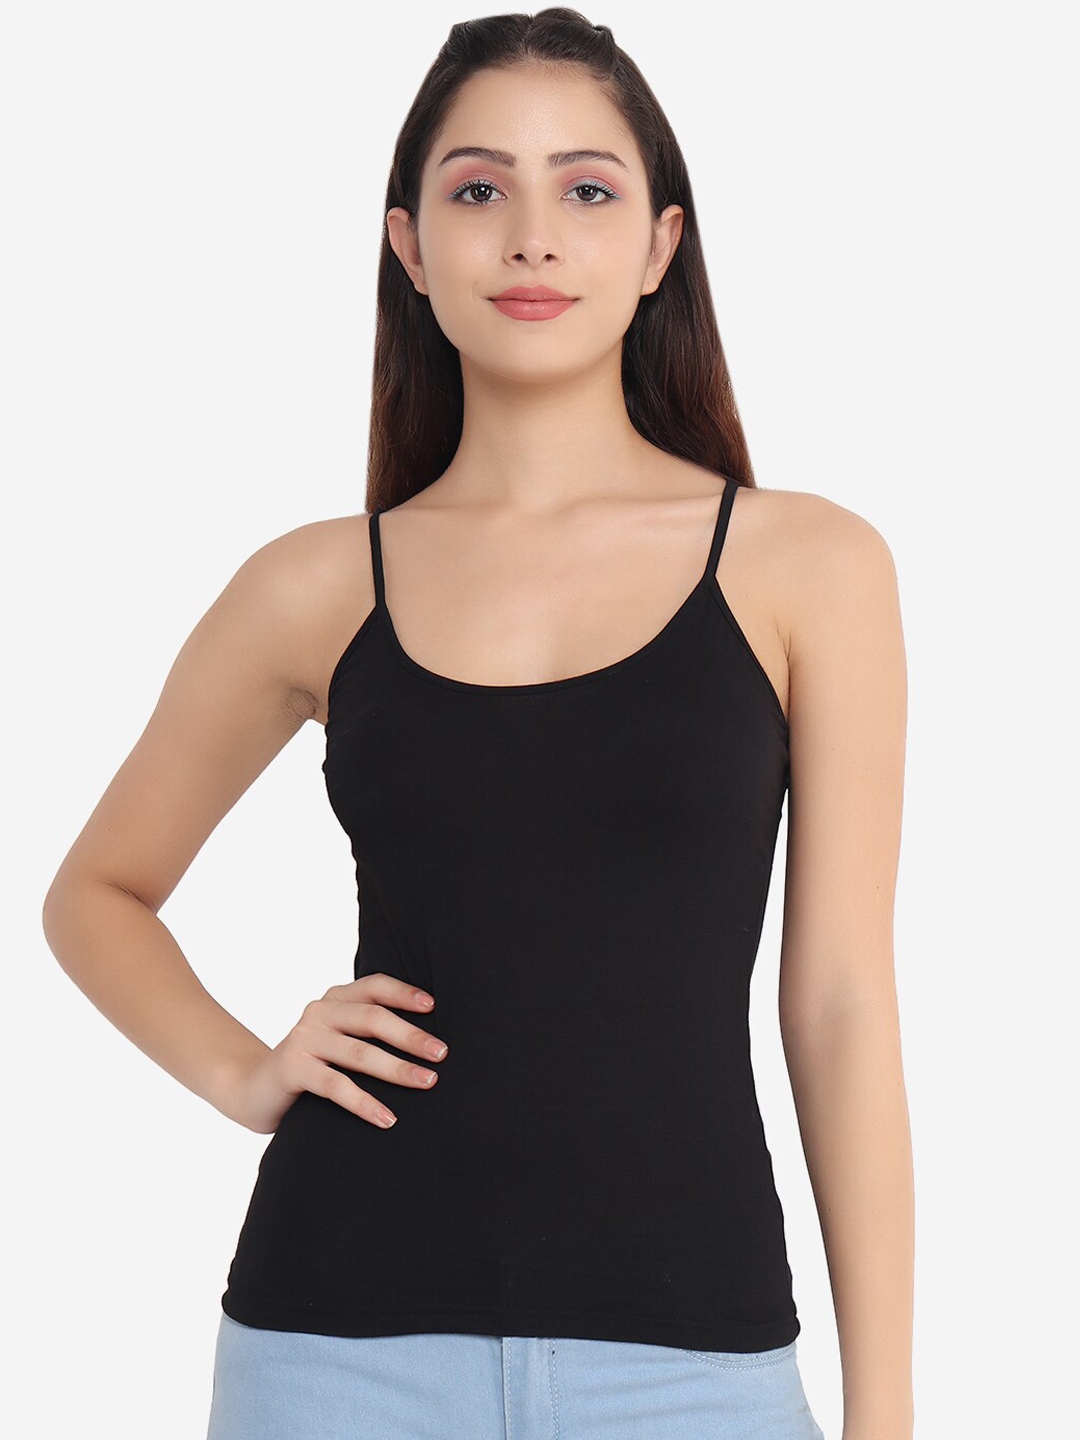 Buy AMANTE Solid Cotton Sleeveless Regular Fit Womens Camisole